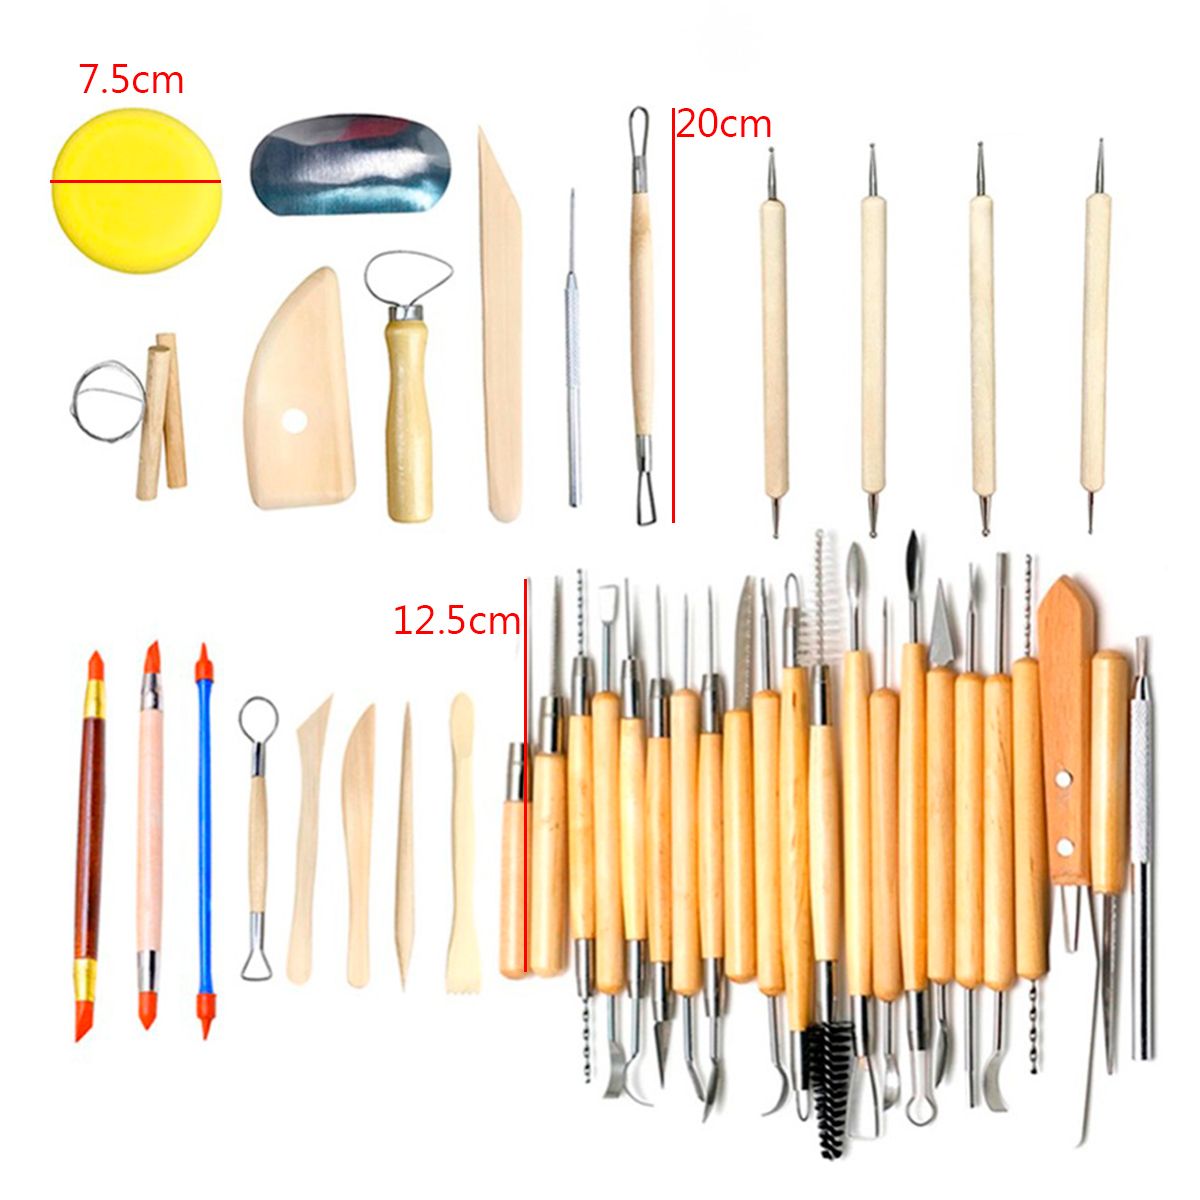 42Pcs-Wooden-Clay-Sculpting-Tools-Pottery-Carving-Tool-Set-Modeling-Craft-Hobby-1228614